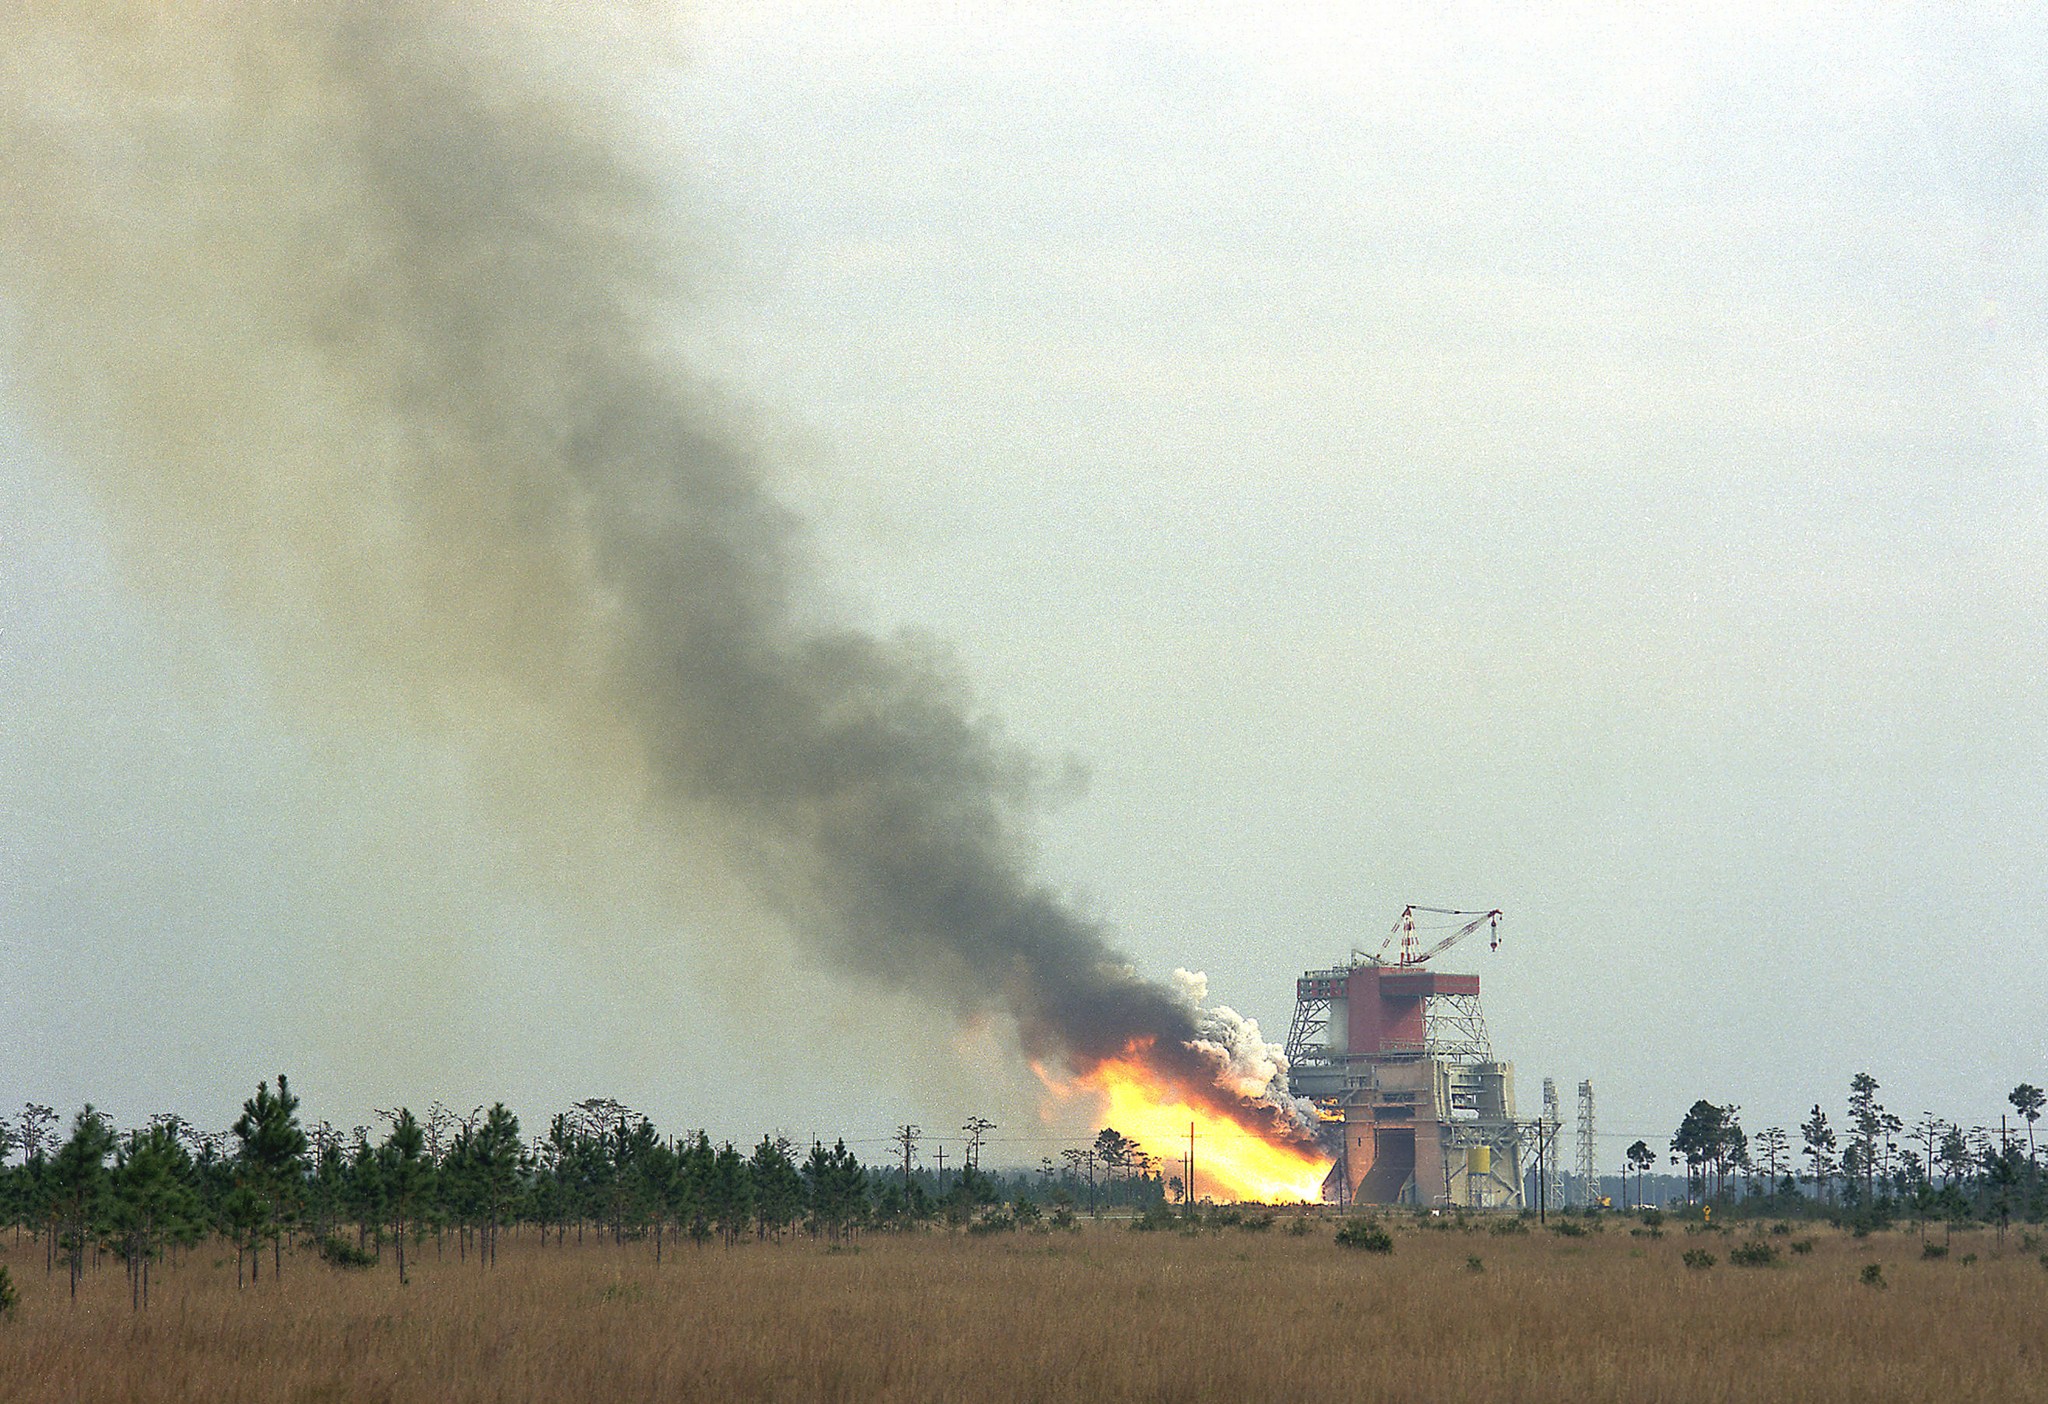  hot fire test of the Saturn V S-IC-12 stage on the B-2 Test Stand at NASA’s Stennis Space Center on Nov. 3, 1969